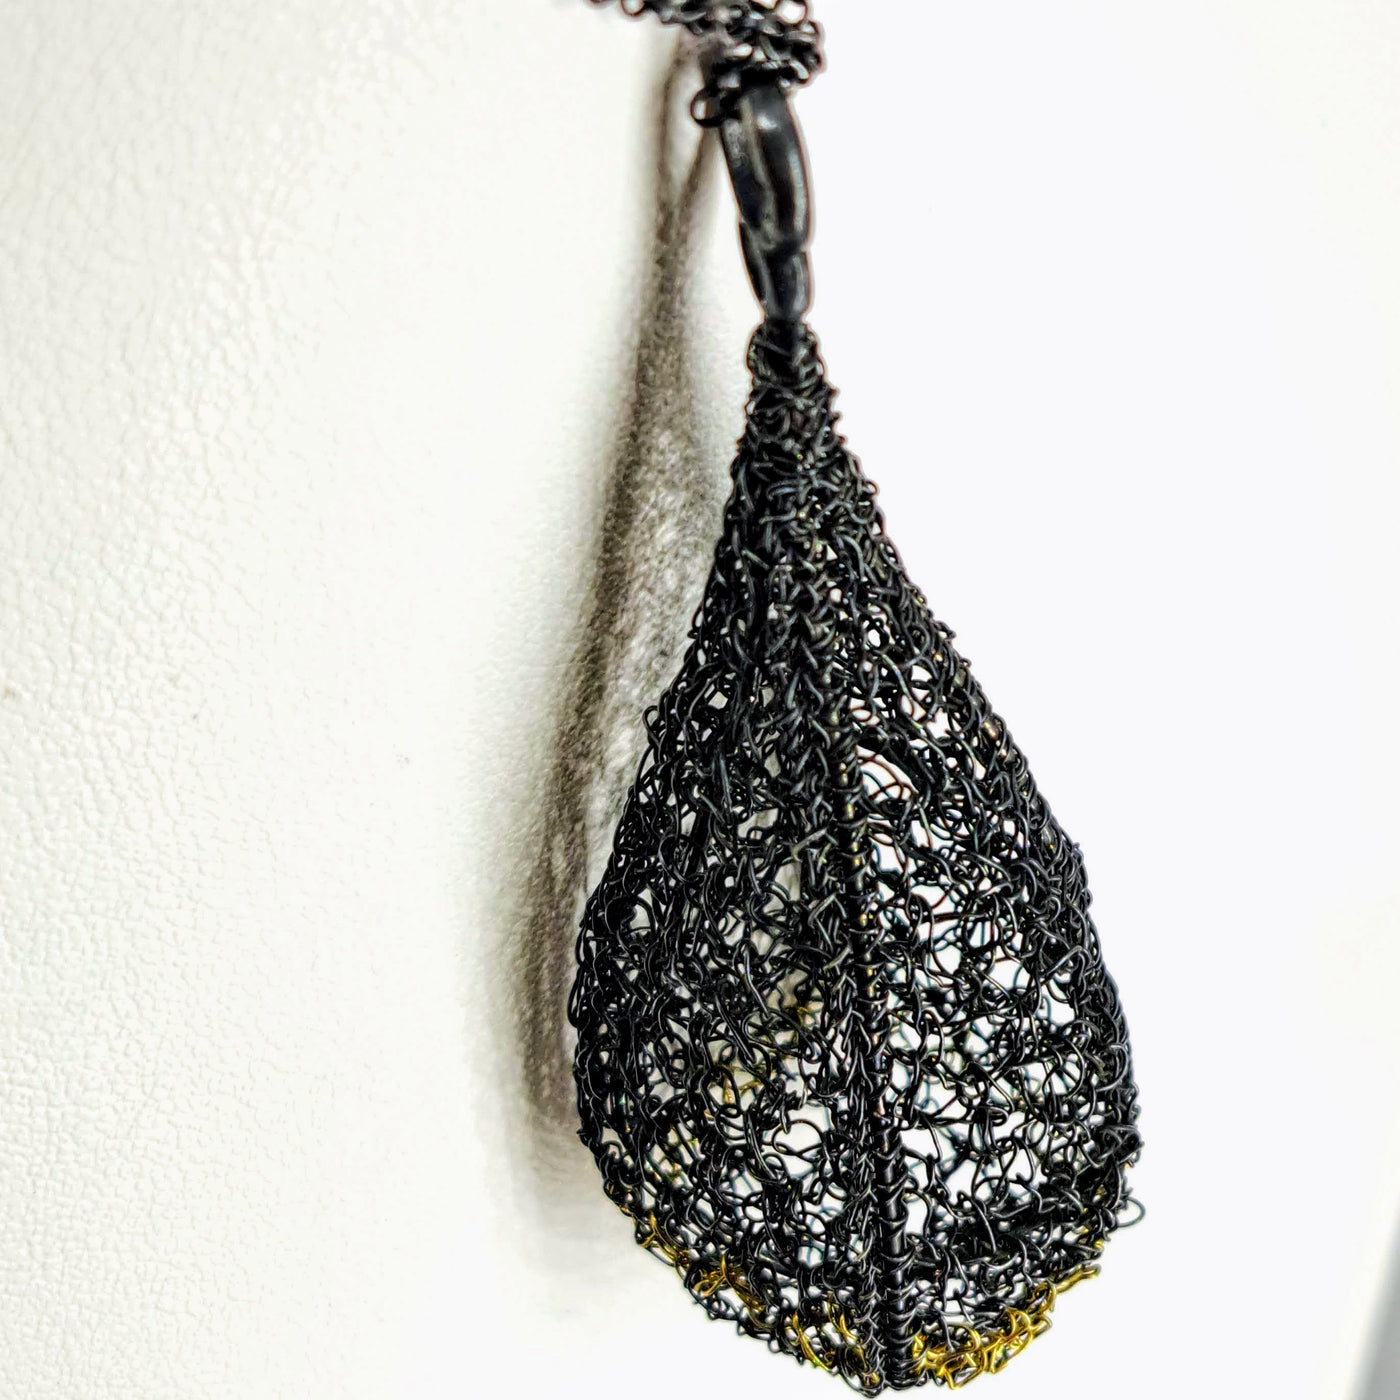 "Cocoon" 30" Pendant Necklace - Crocheted Black Sterling, Gold Accents